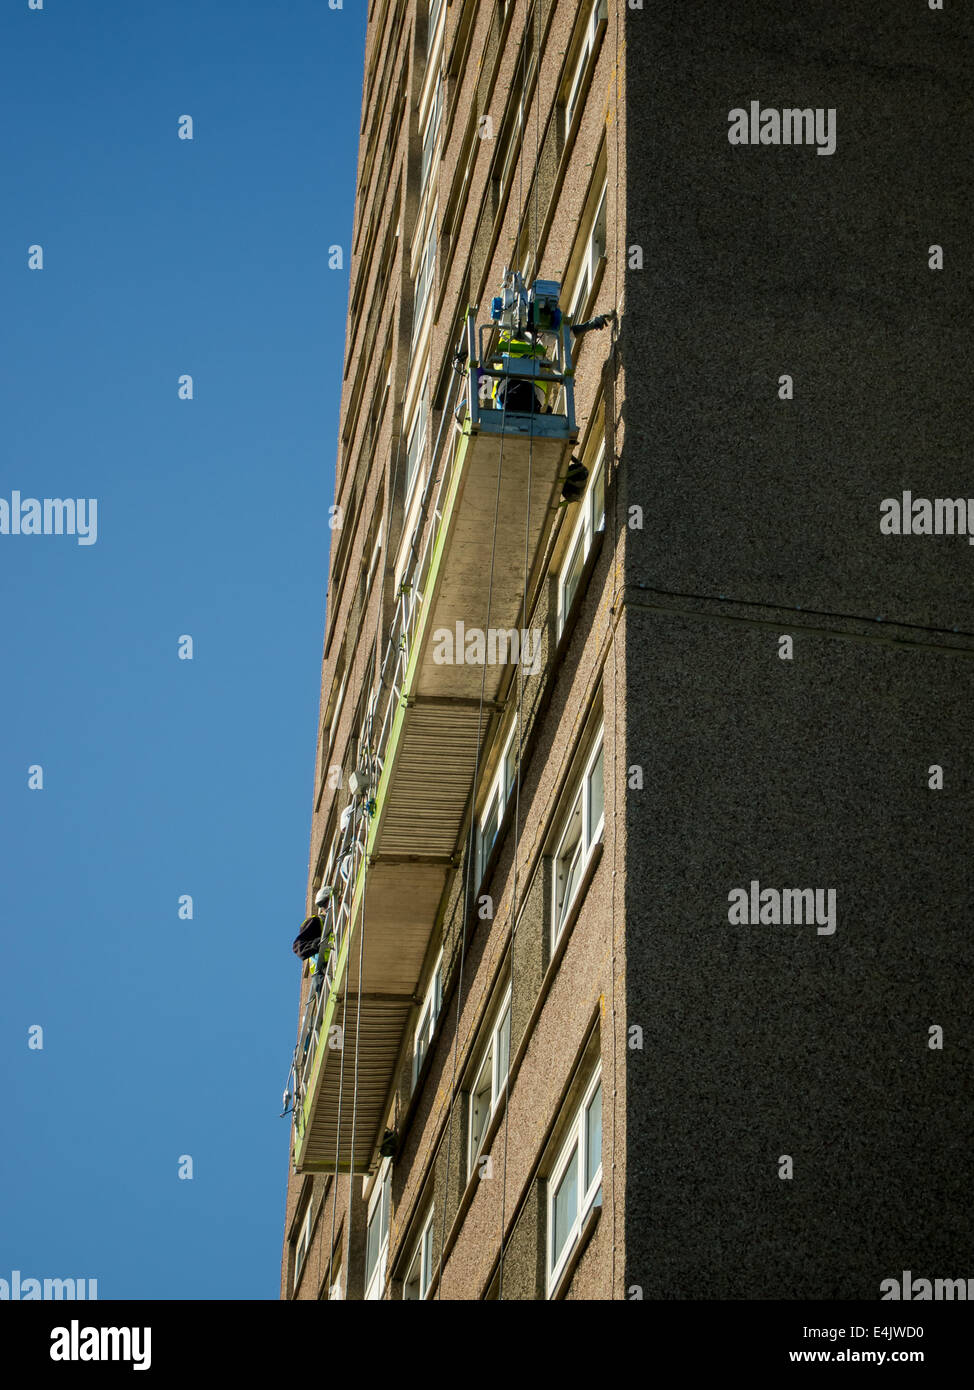 Workmen in a suspended platform carry out concrete repairs on a high rise tower block Stock Photo